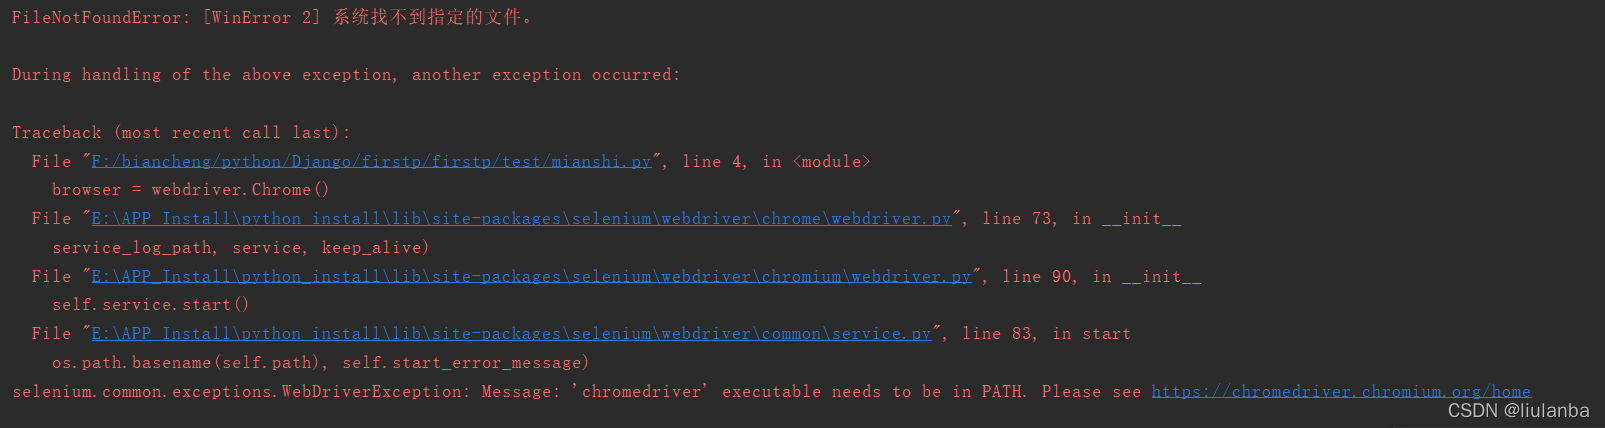 selenium.common.exceptions.WebDriverException: Message: ‘chromedriver‘ executable needs to be in PAT